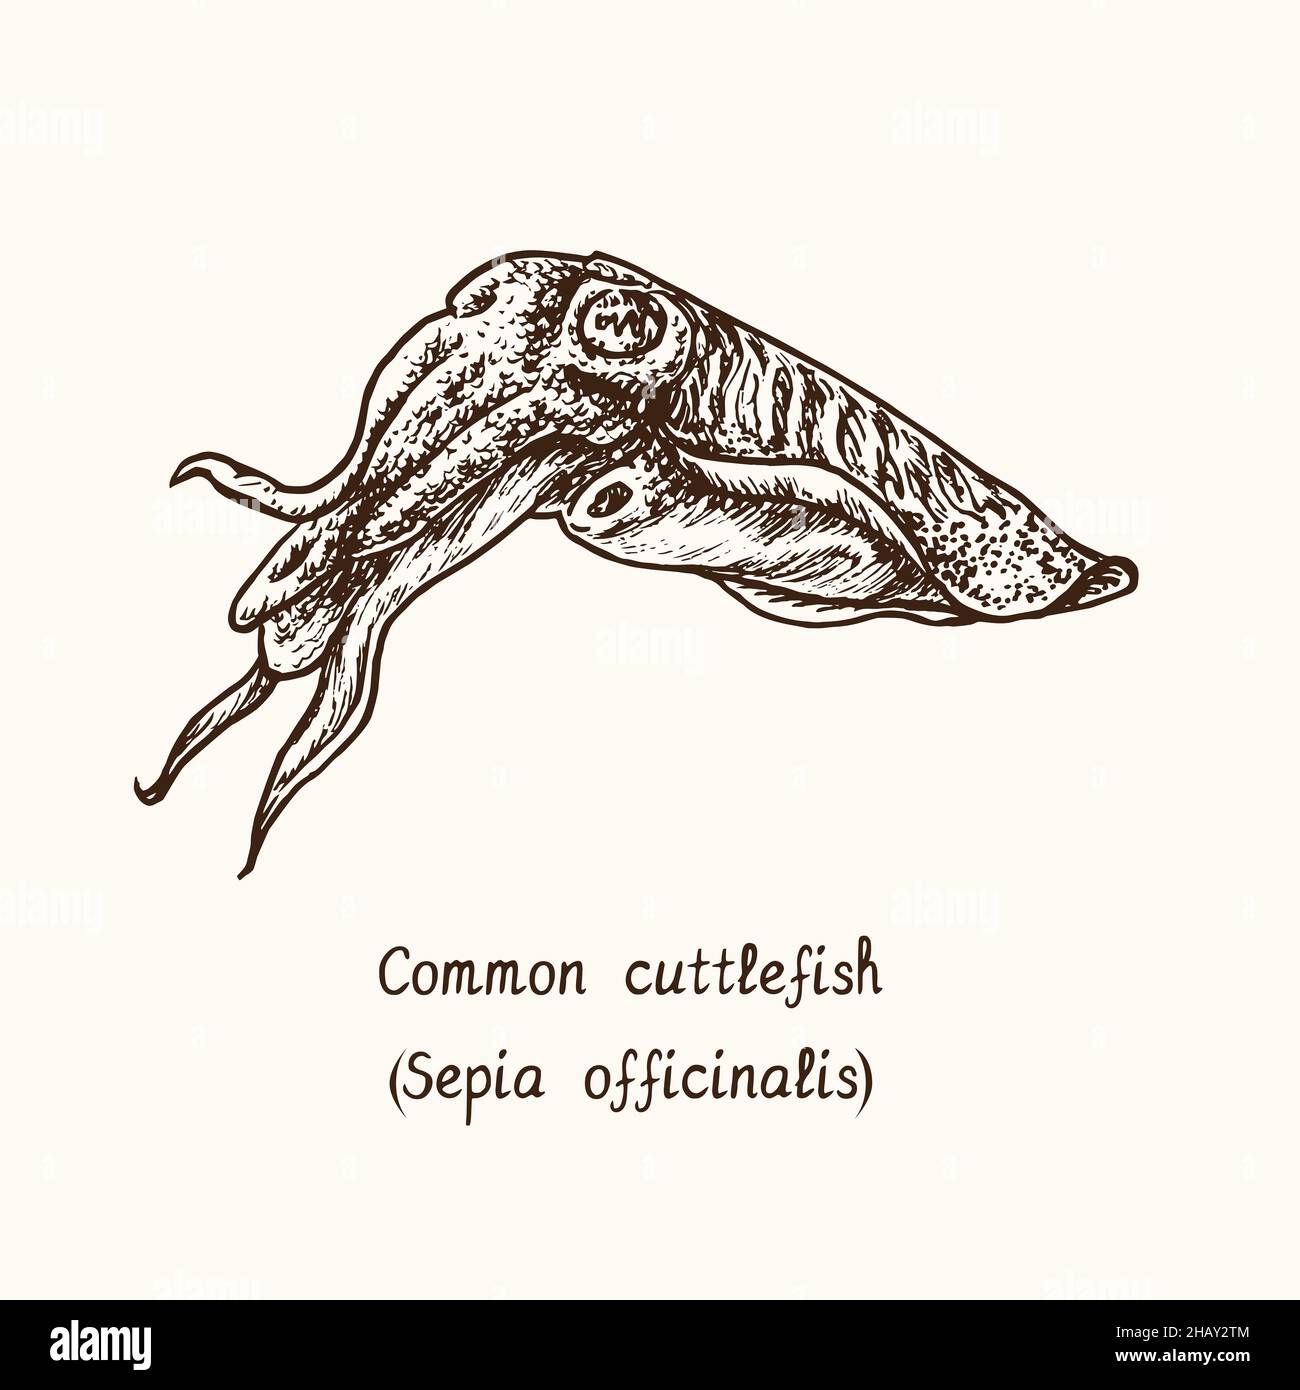 Common cuttlefish or European common cuttlefish (Sepia officinalis). Ink black and white doodle drawing in woodcut style with inscription. Stock Photo